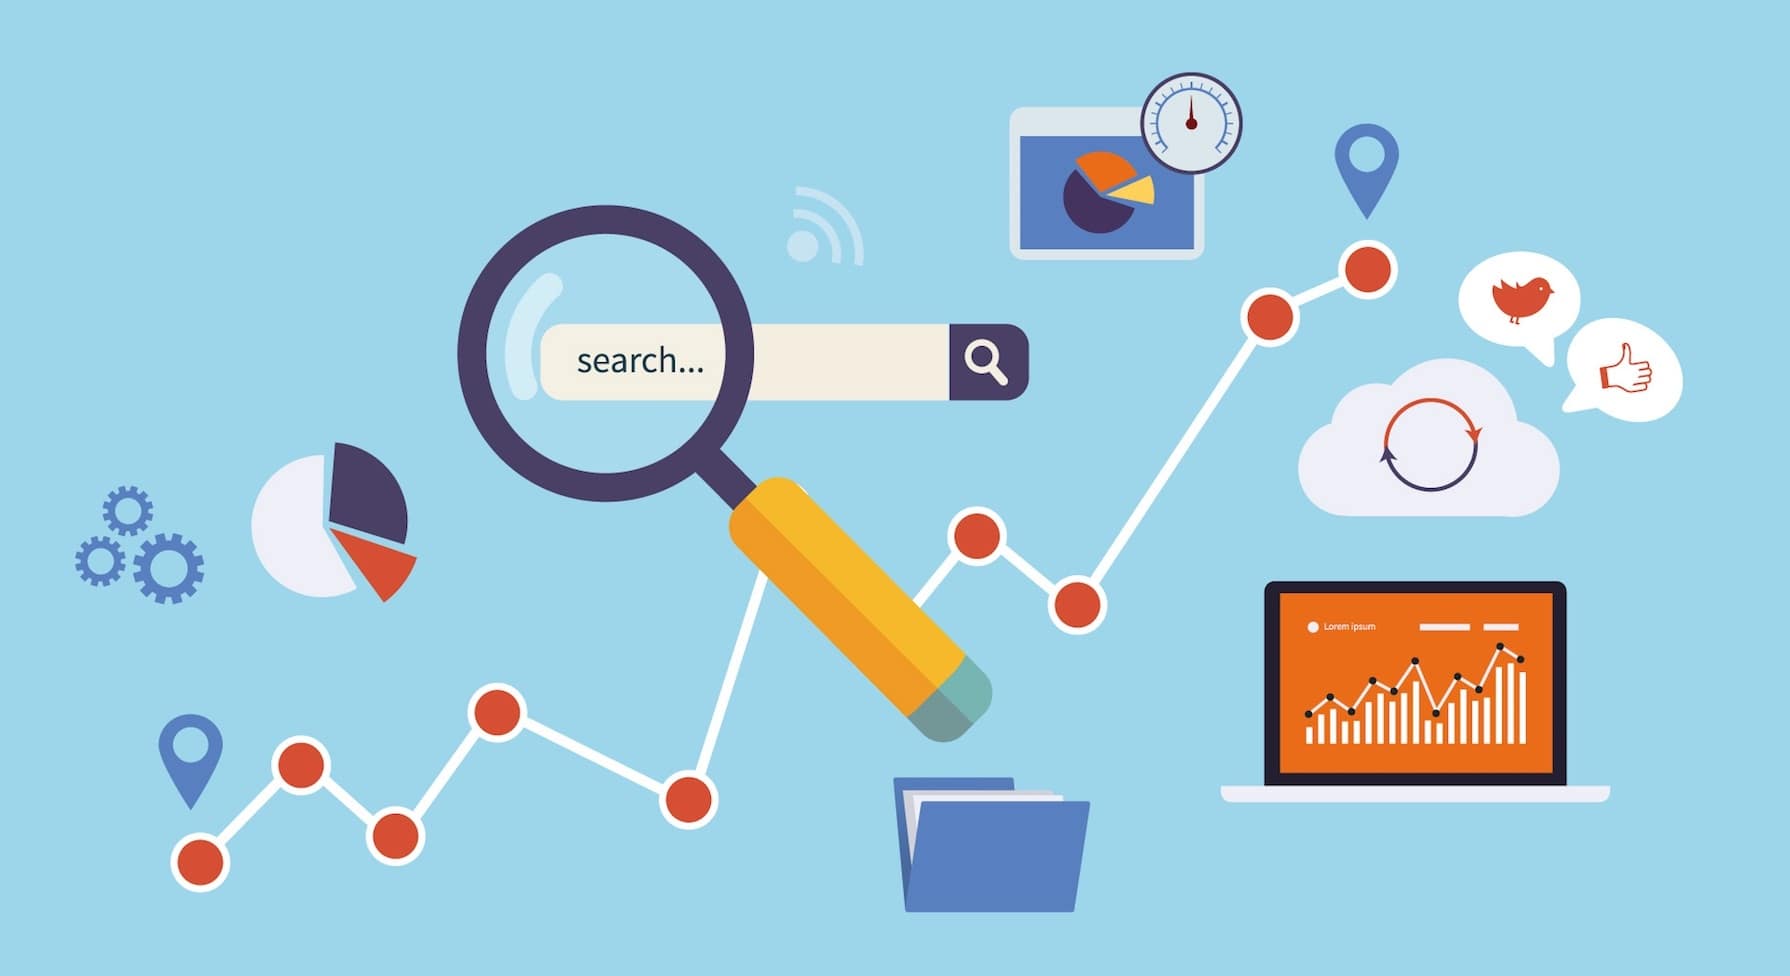 Optimize your website for search